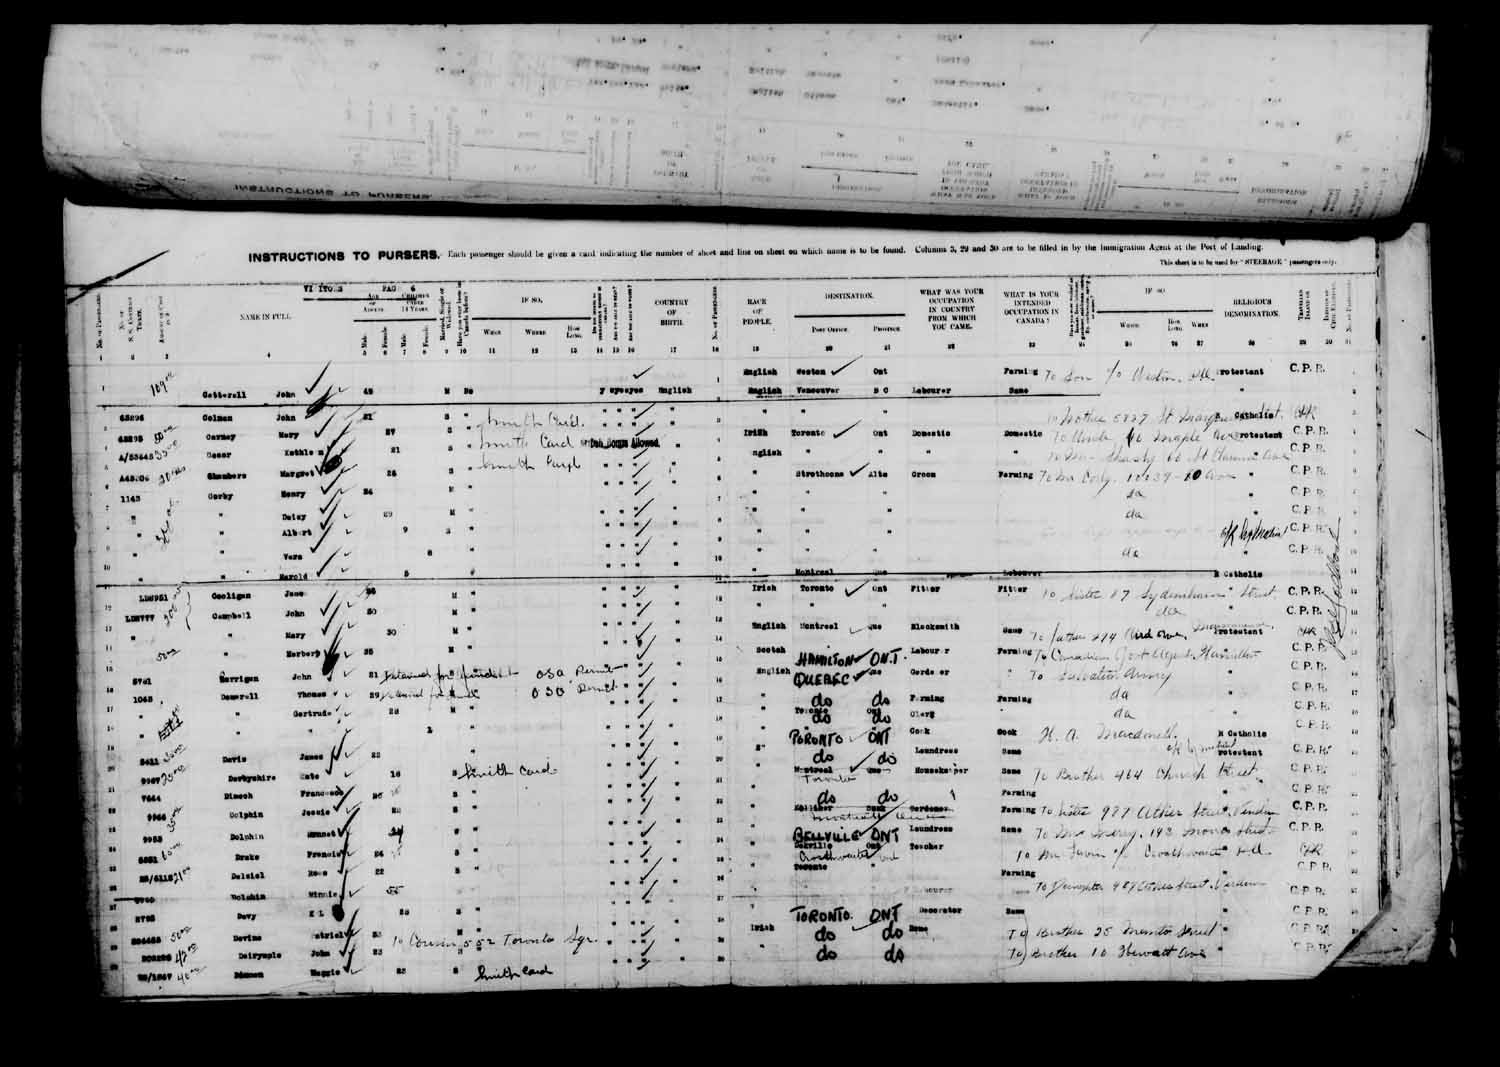 Digitized page of Passenger Lists for Image No.: e003610646